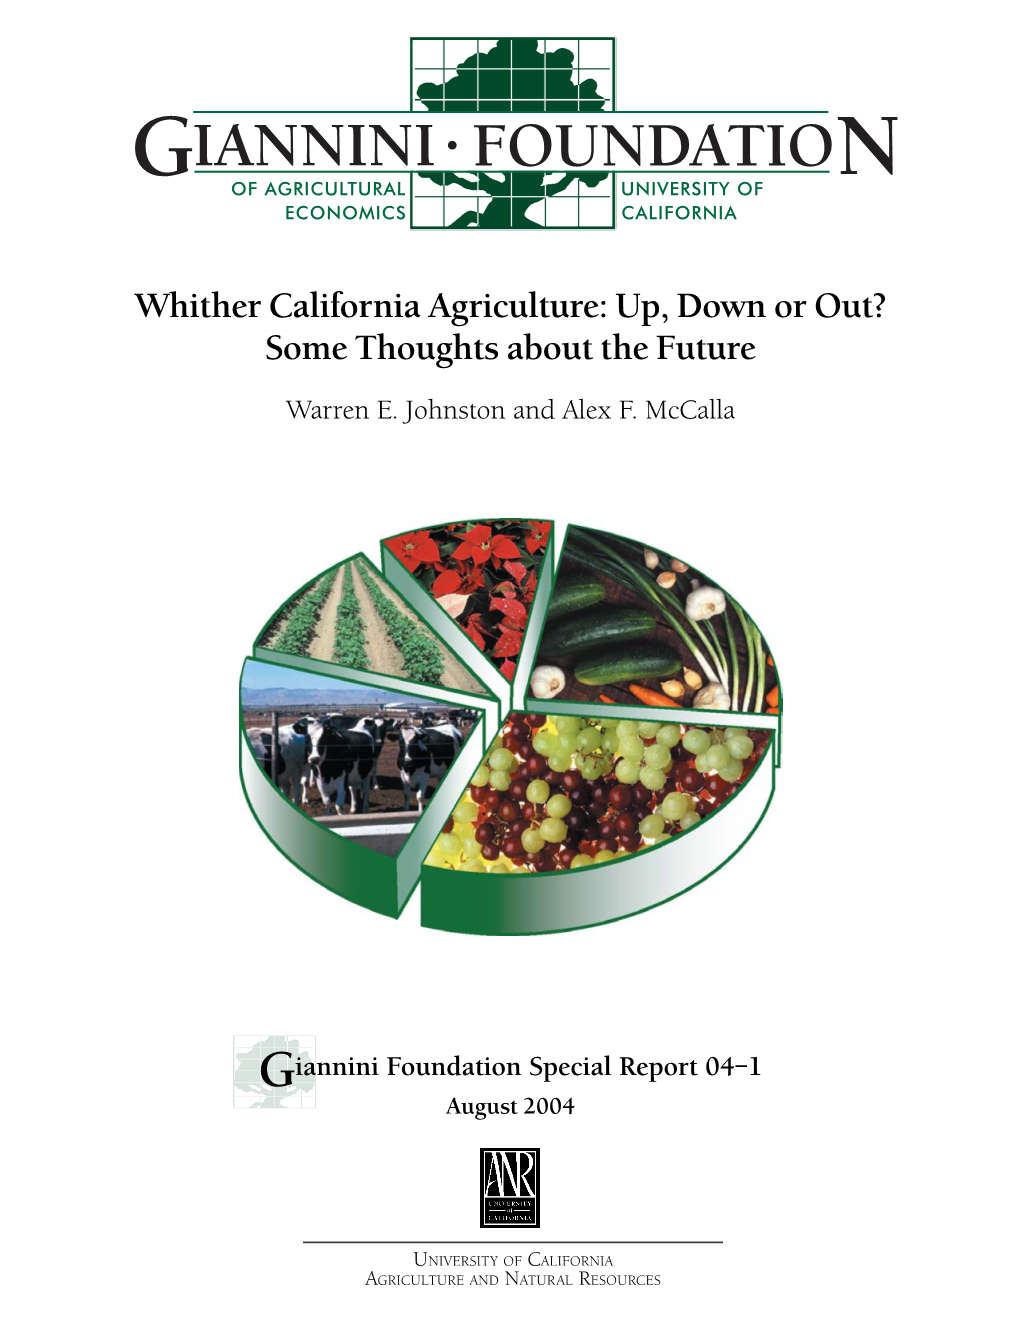 Whither California Agriculture: Up, Down Or Out? Some Thoughts About the Future